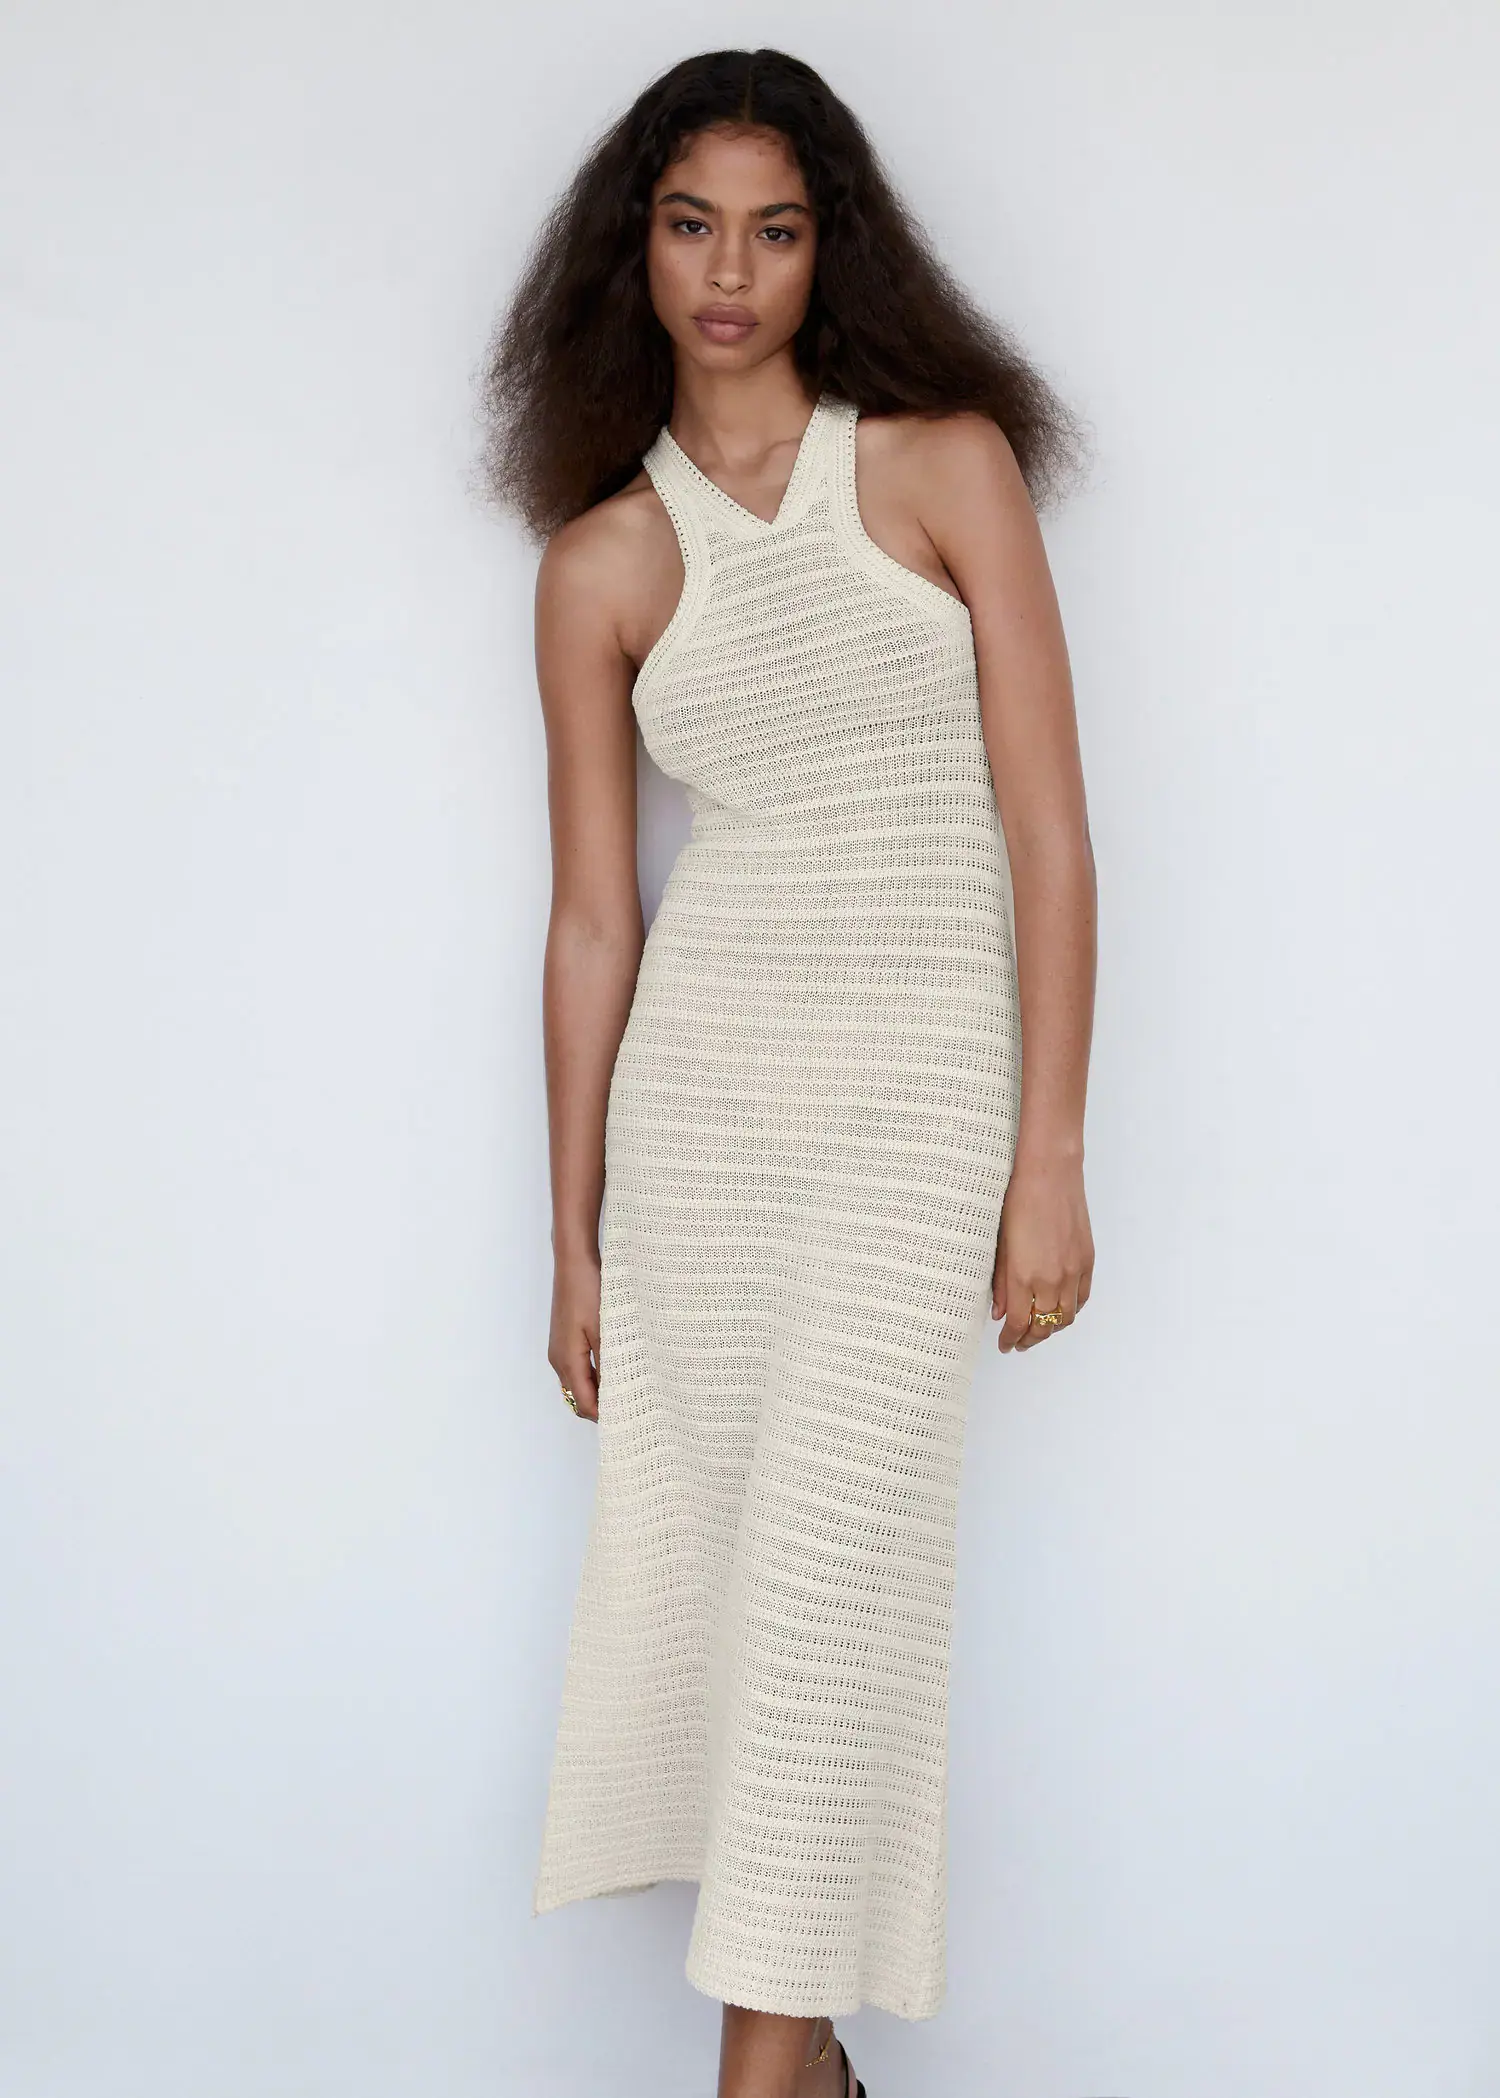 Mango Halter-neck crochet dress. a woman in a white dress standing in front of a white wall. 